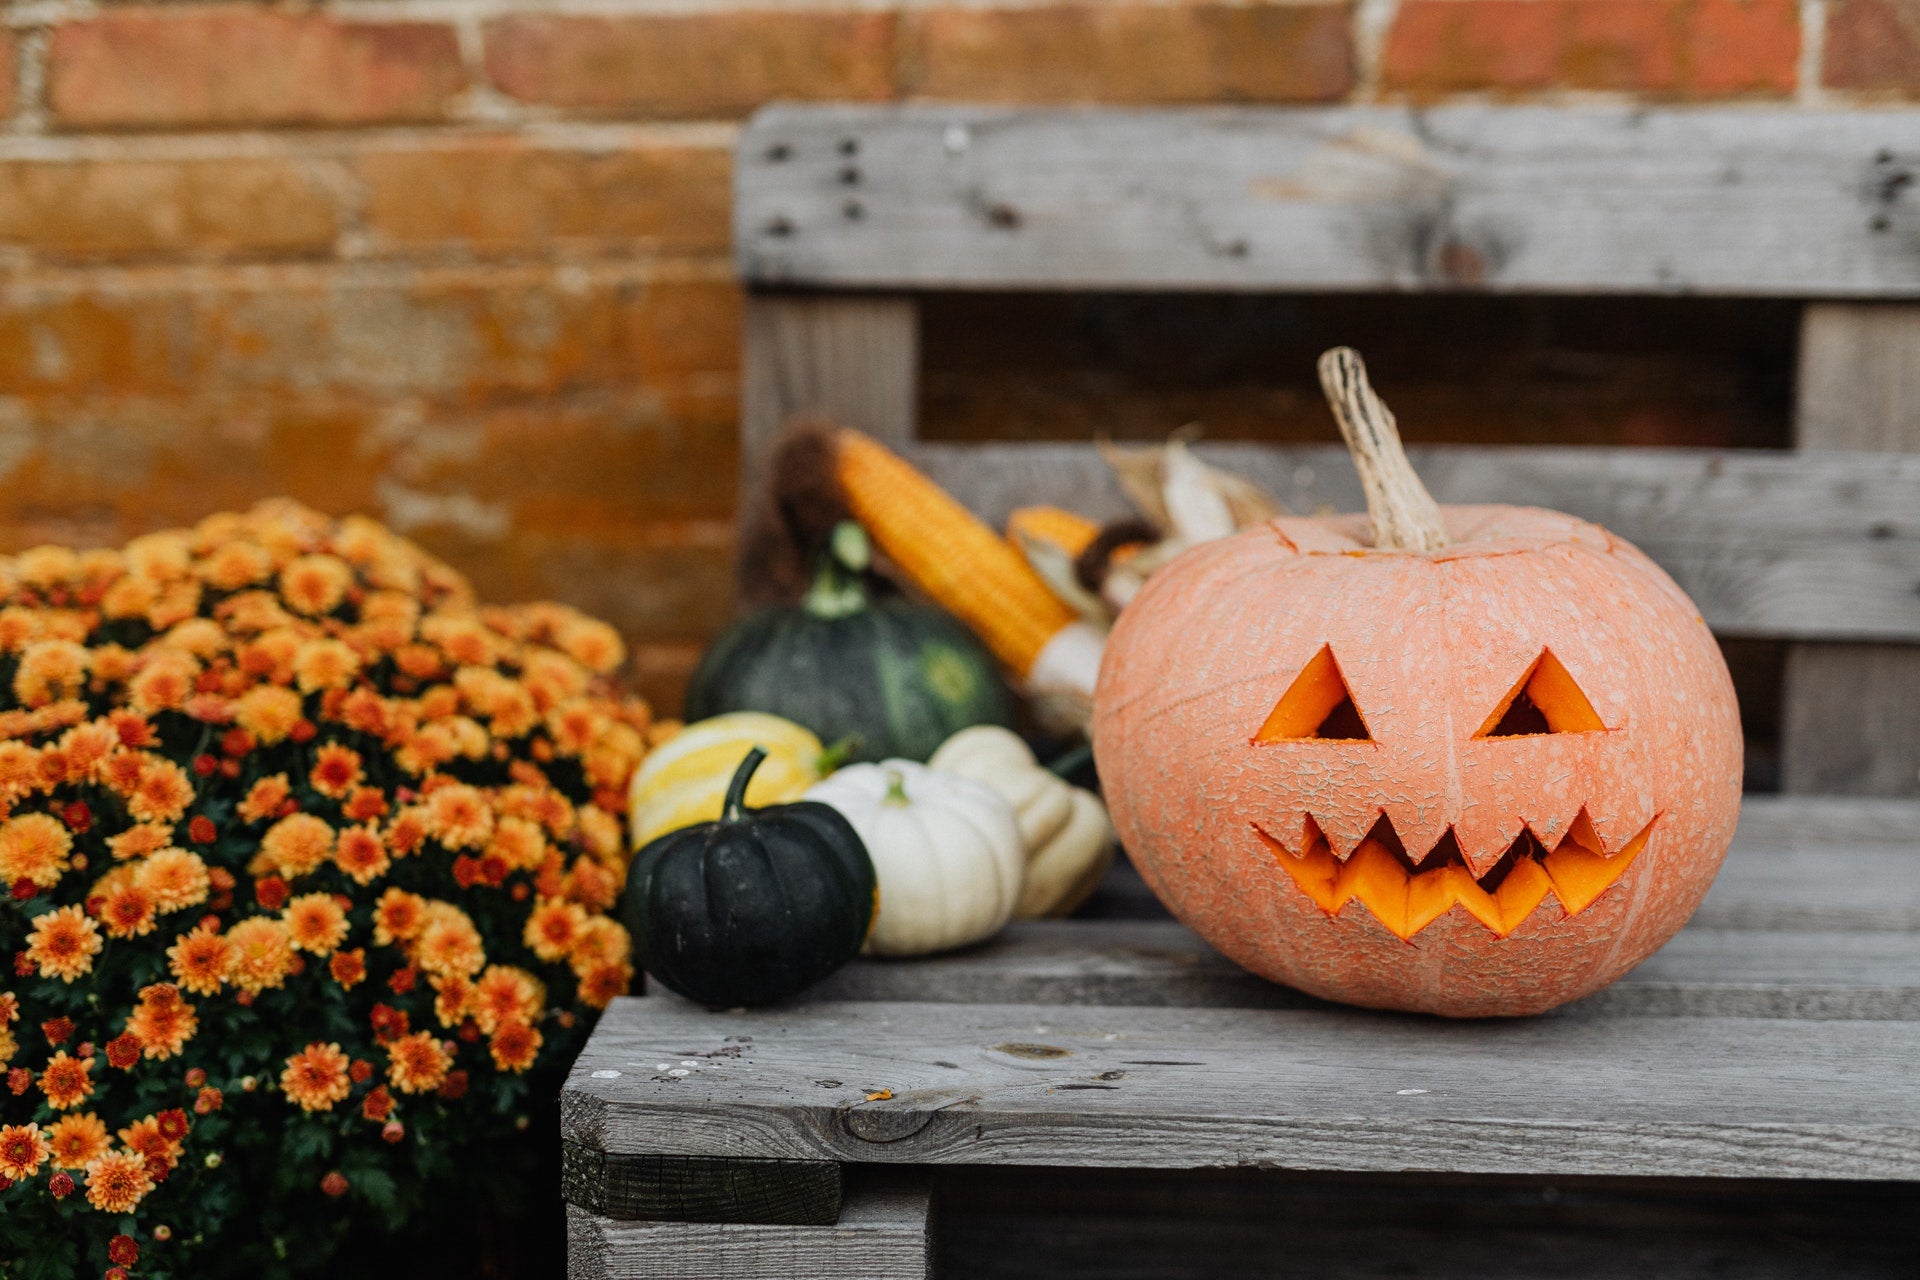 Fun activities for Halloween loving kids! The image shows a Jack-o'-lantern and festive gourds and orange mums on a bench.